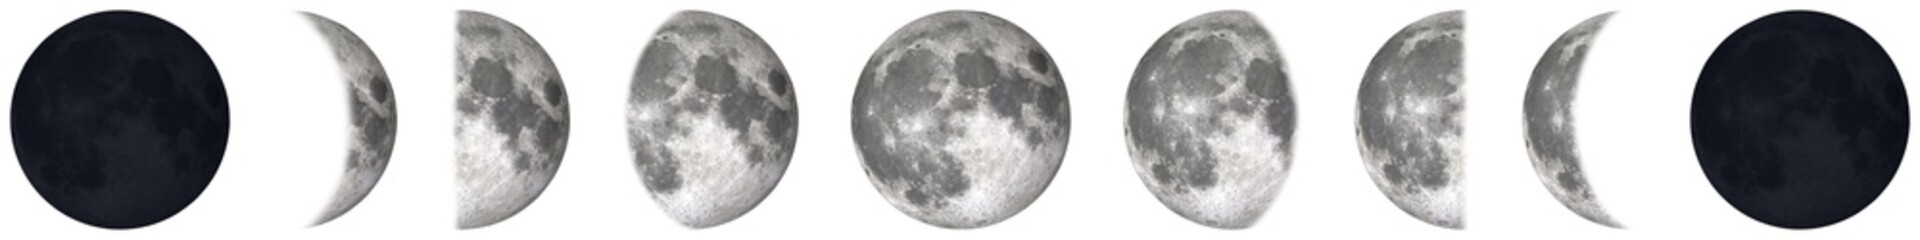 All phases of Moon Waning Crescent, Third Quarter, Waning Gibbous, Full Moon, Waxing Gibbous, First...